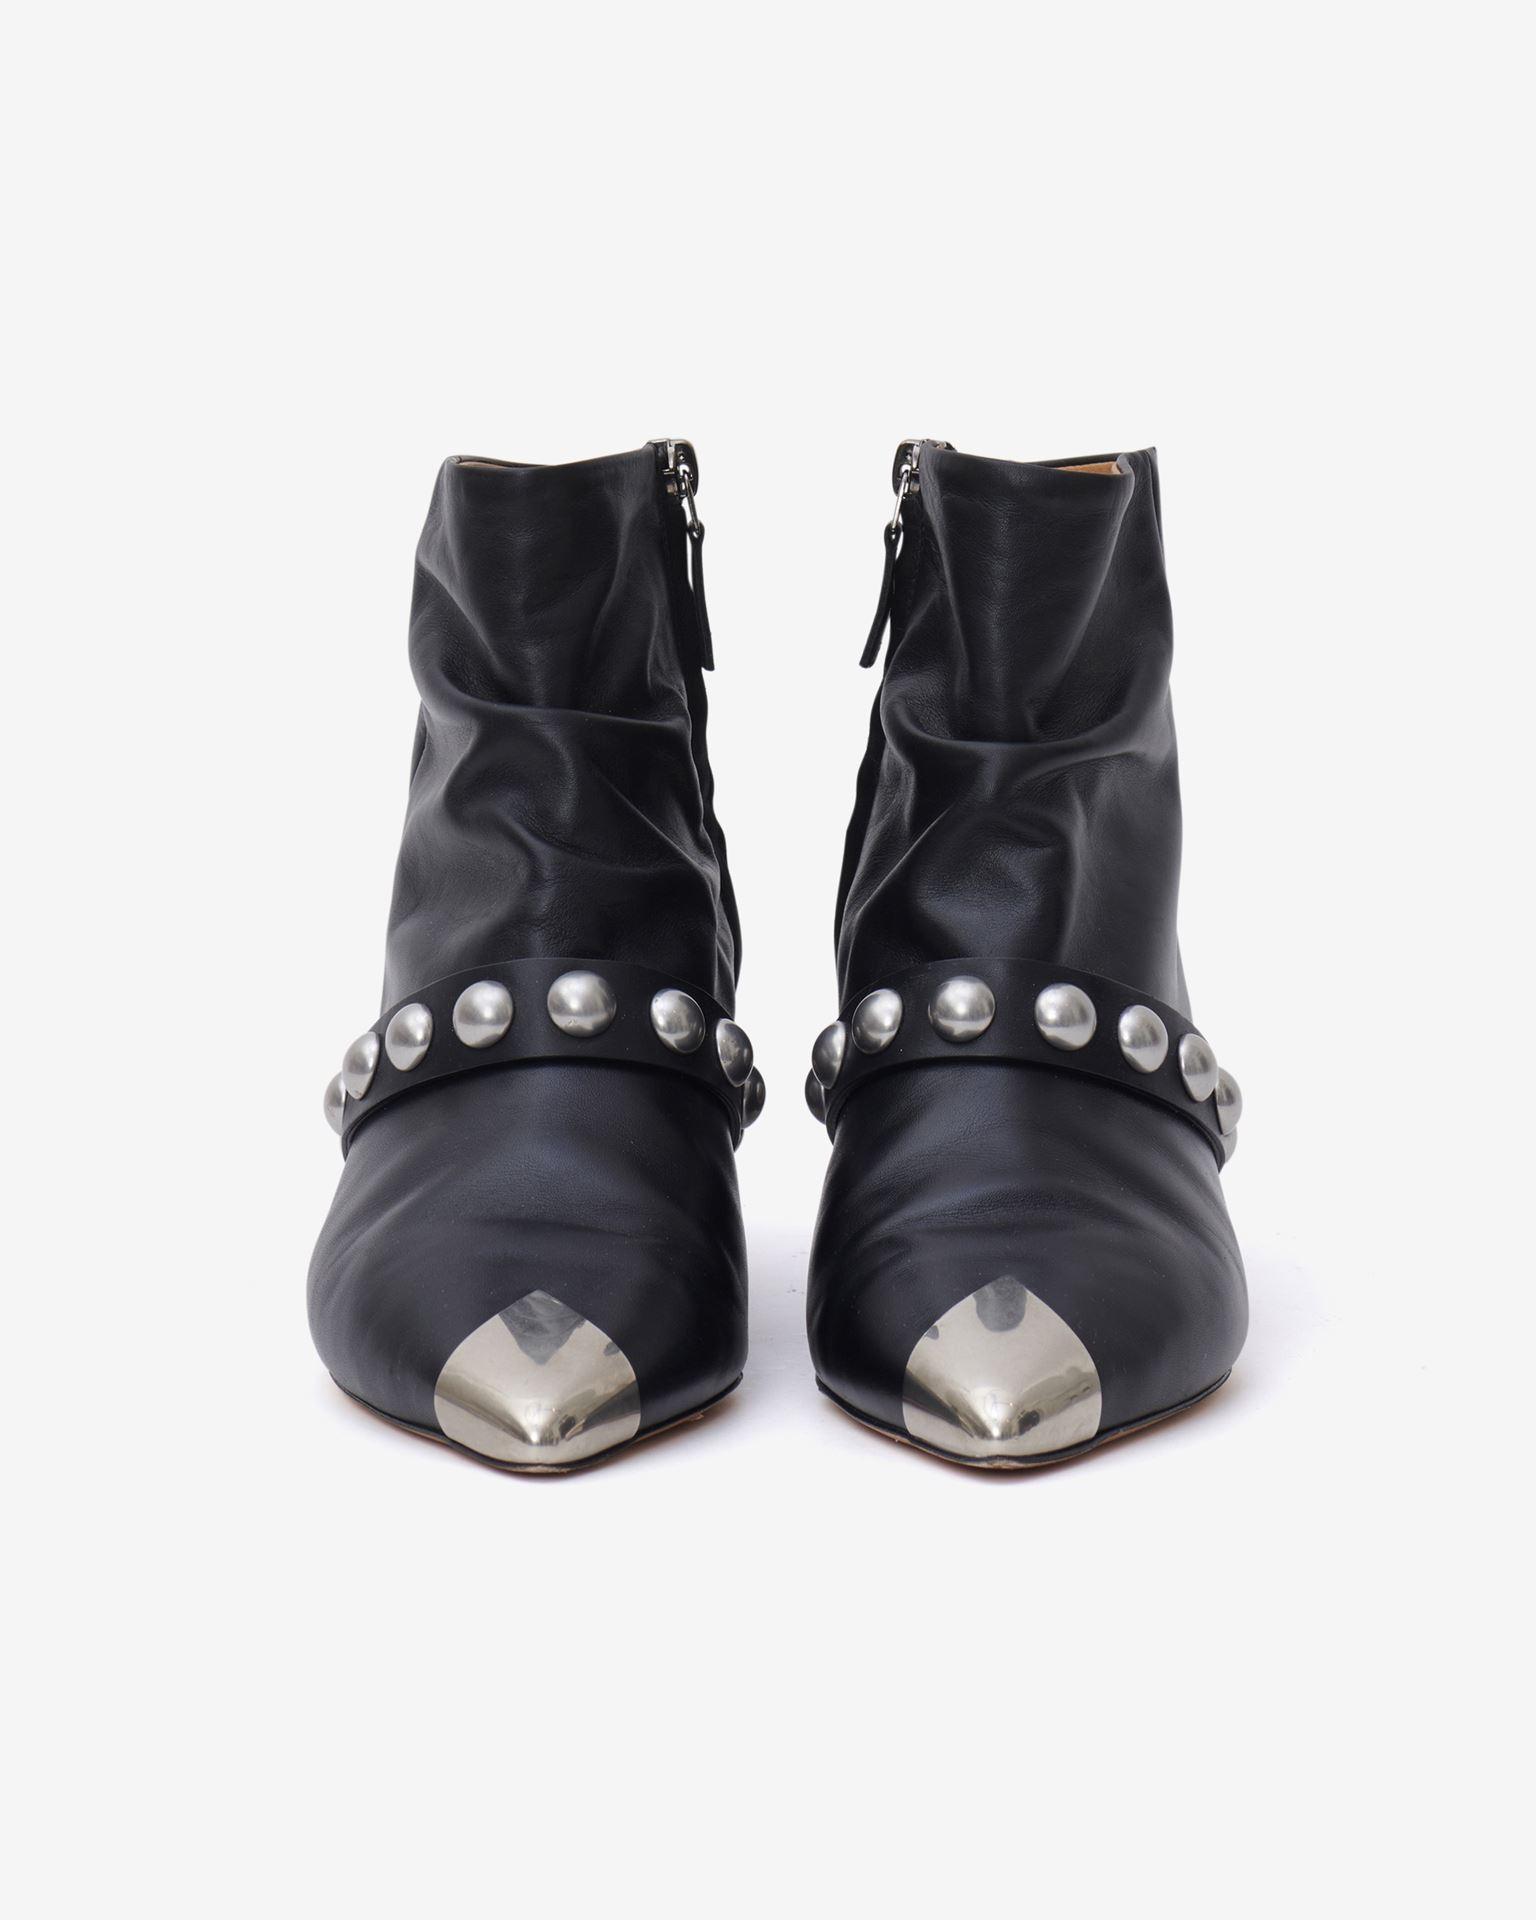 Womens ISABEL MARANT black Leather Donatee Ankle Boots